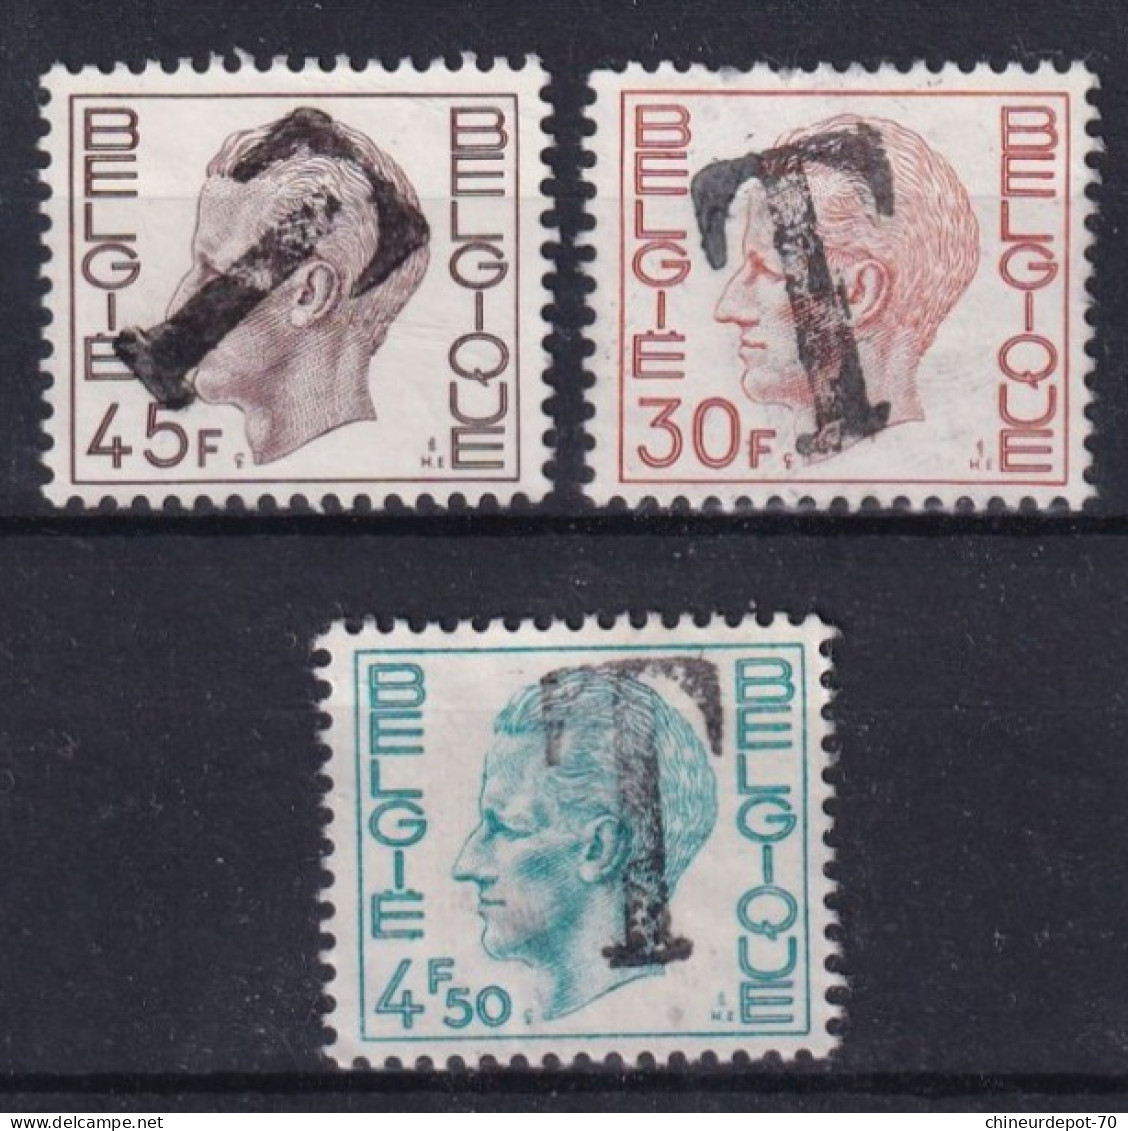 TIMBRES T Taxes ROI KING BAUDOUIN - Stamps